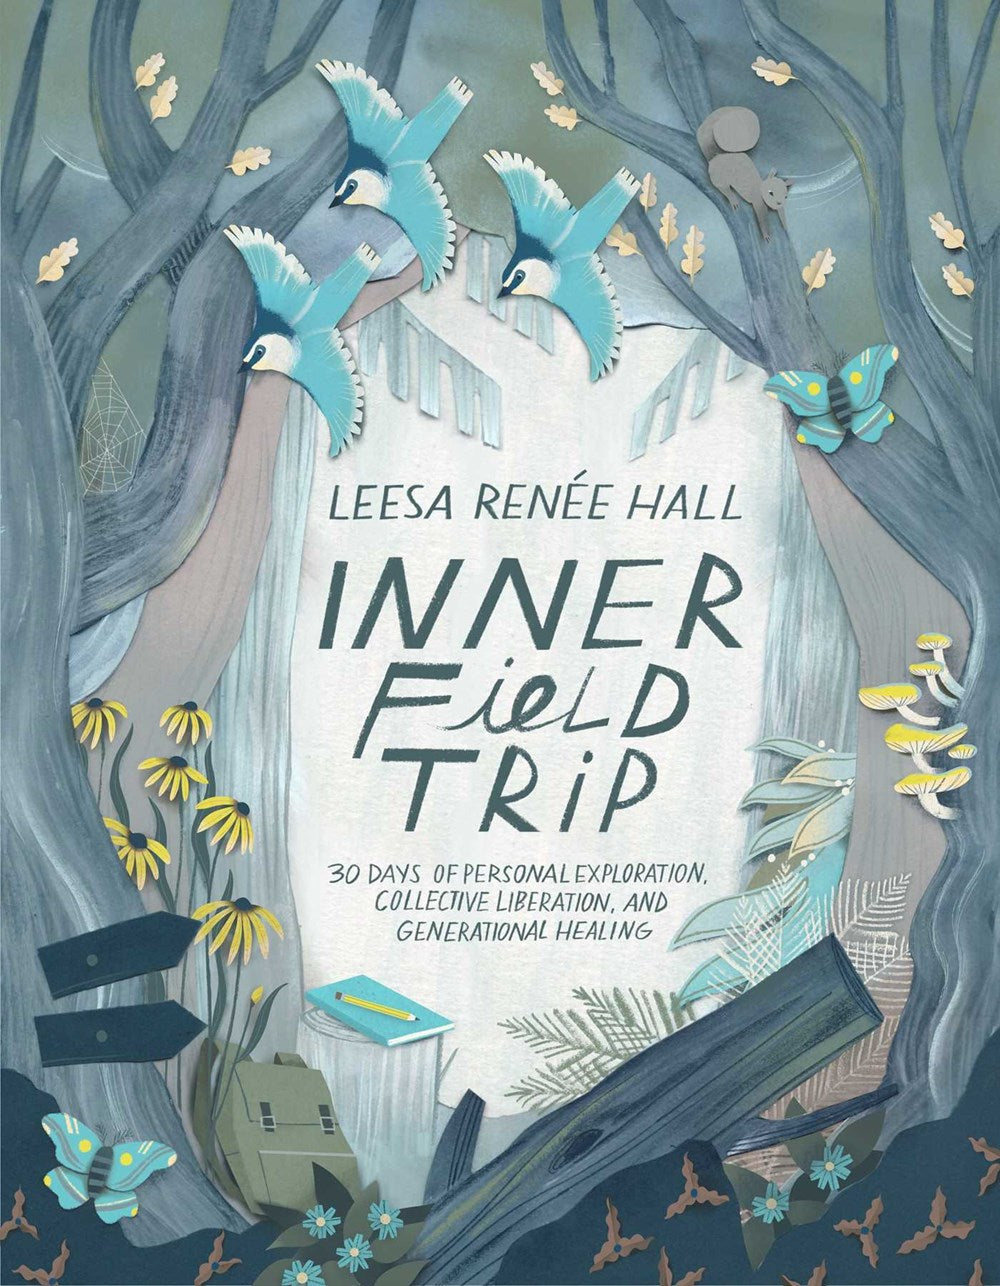 PRE-ORDER: Inner Field Trip: 30 Days of Personal Exploration, Collective Liberation, and Generational Healing